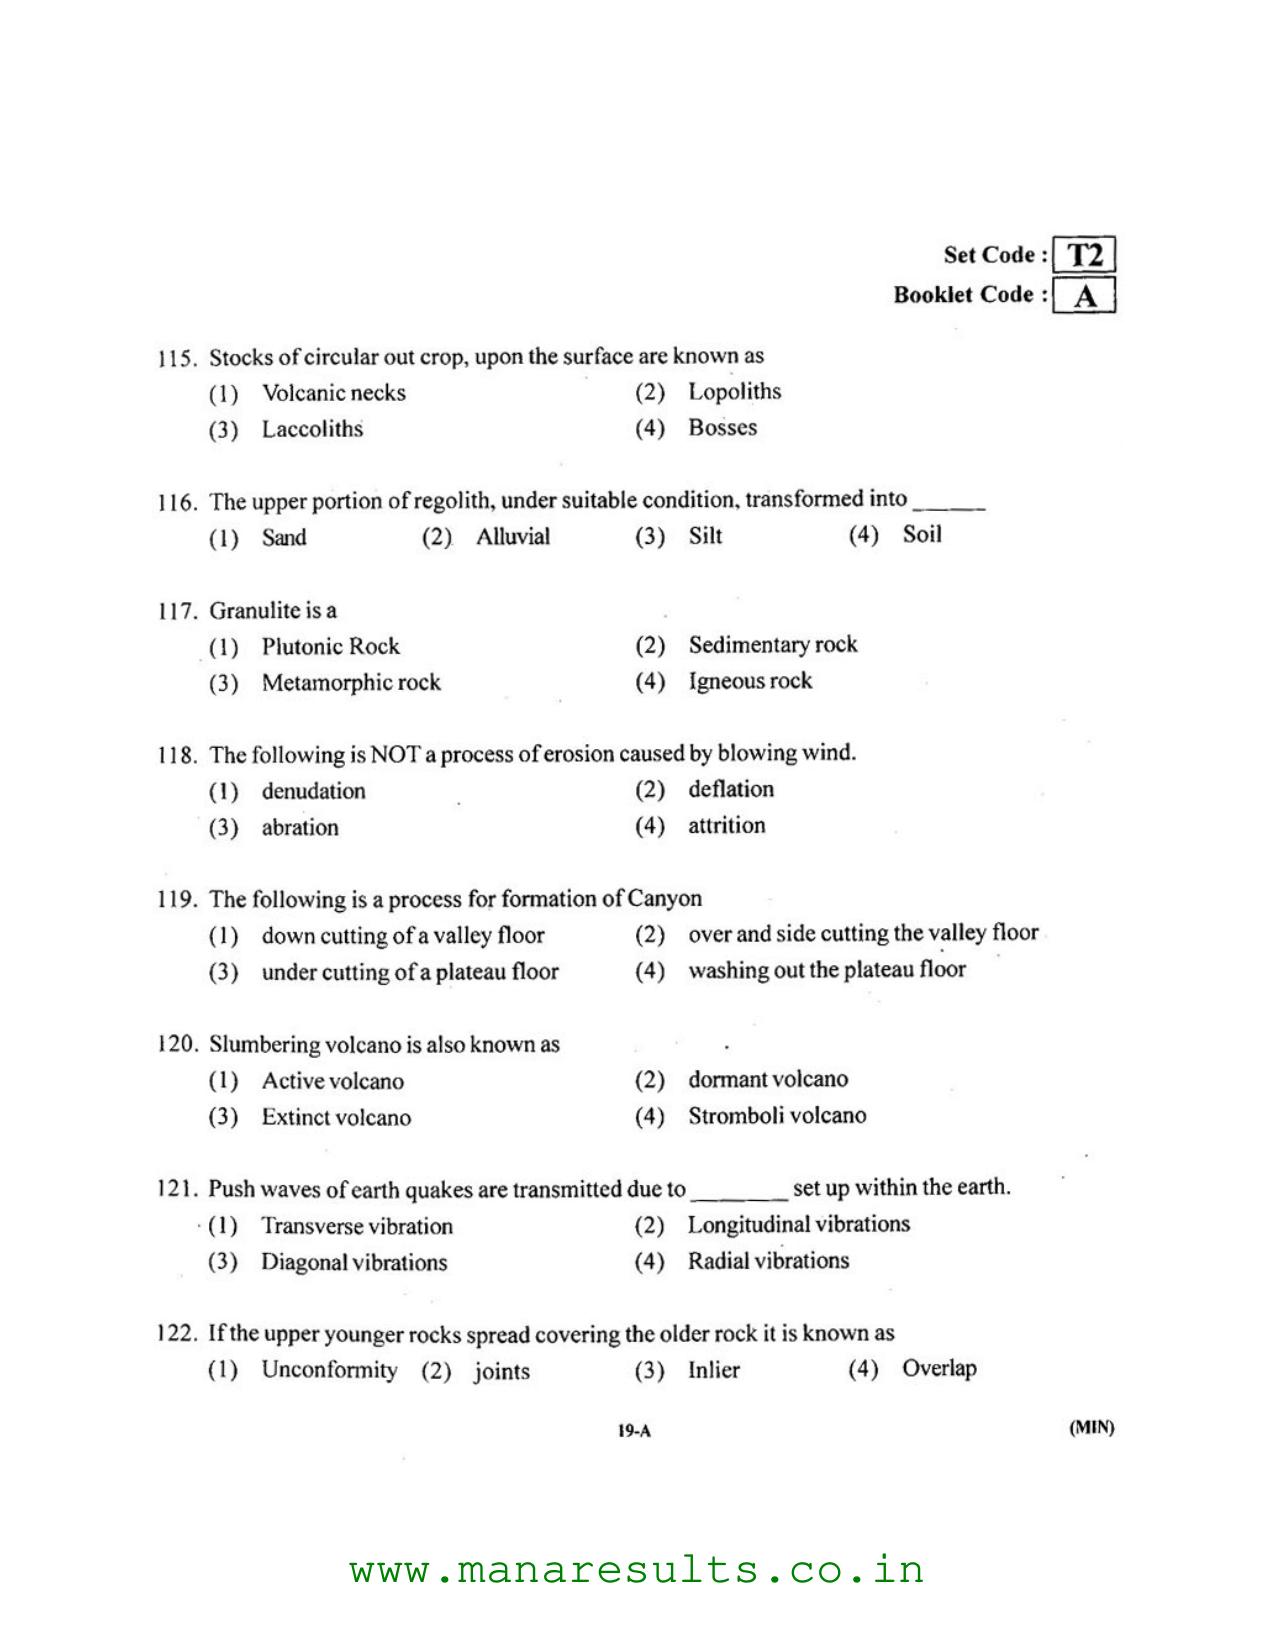 AP ECET 2016 Mining Engineering Old Previous Question Papers - Page 18